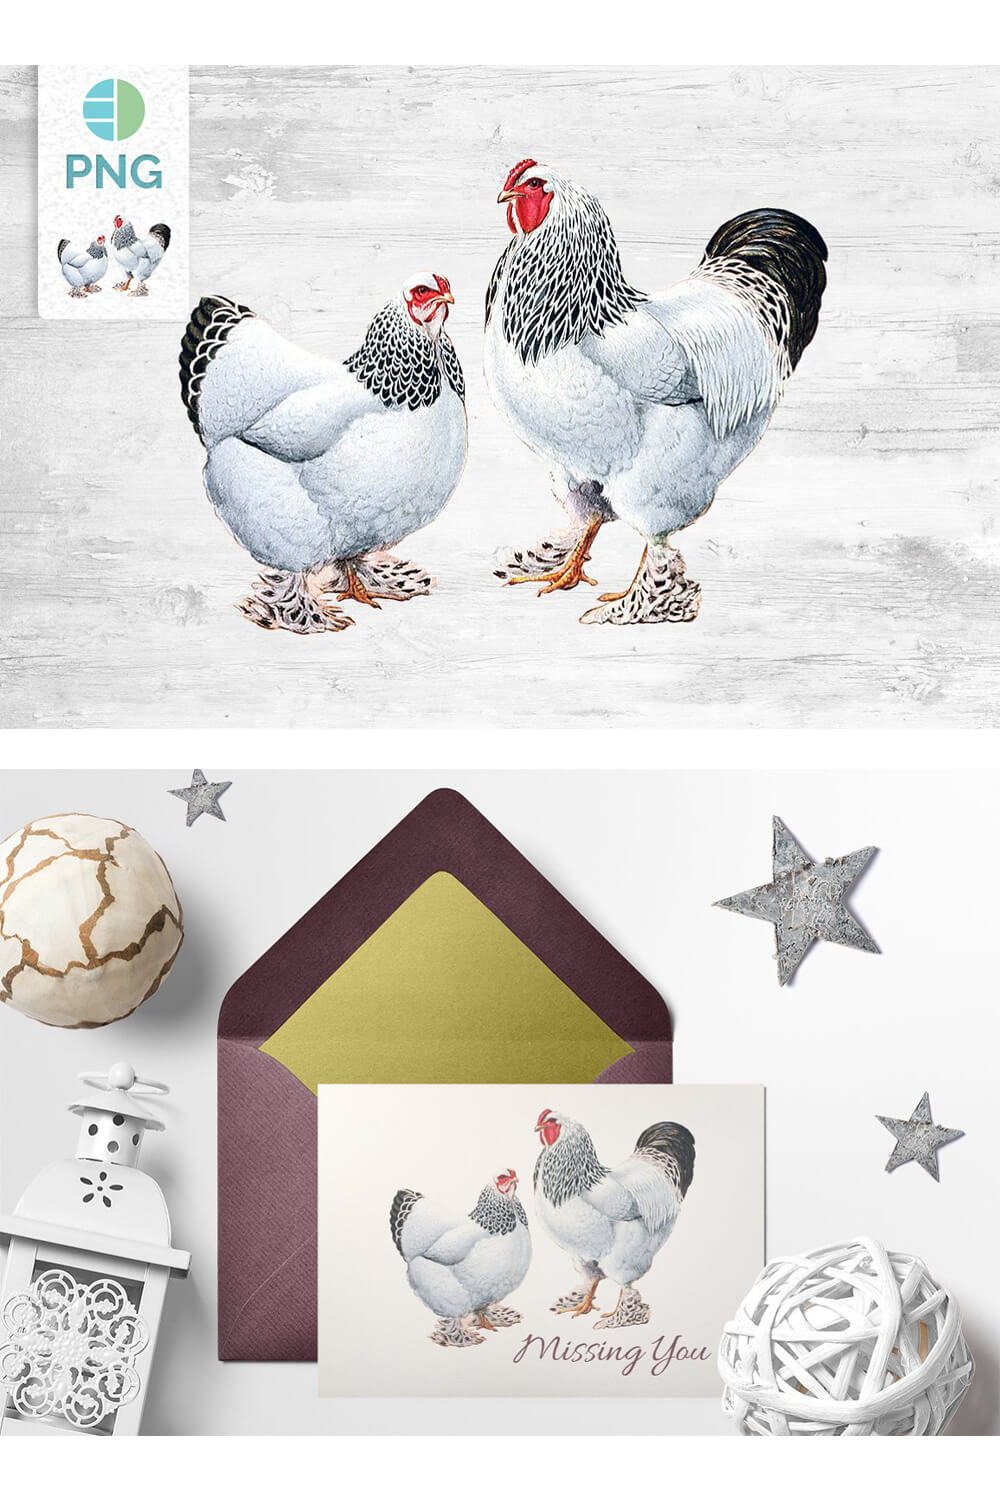 Two adult chickens in a picture and postcard.